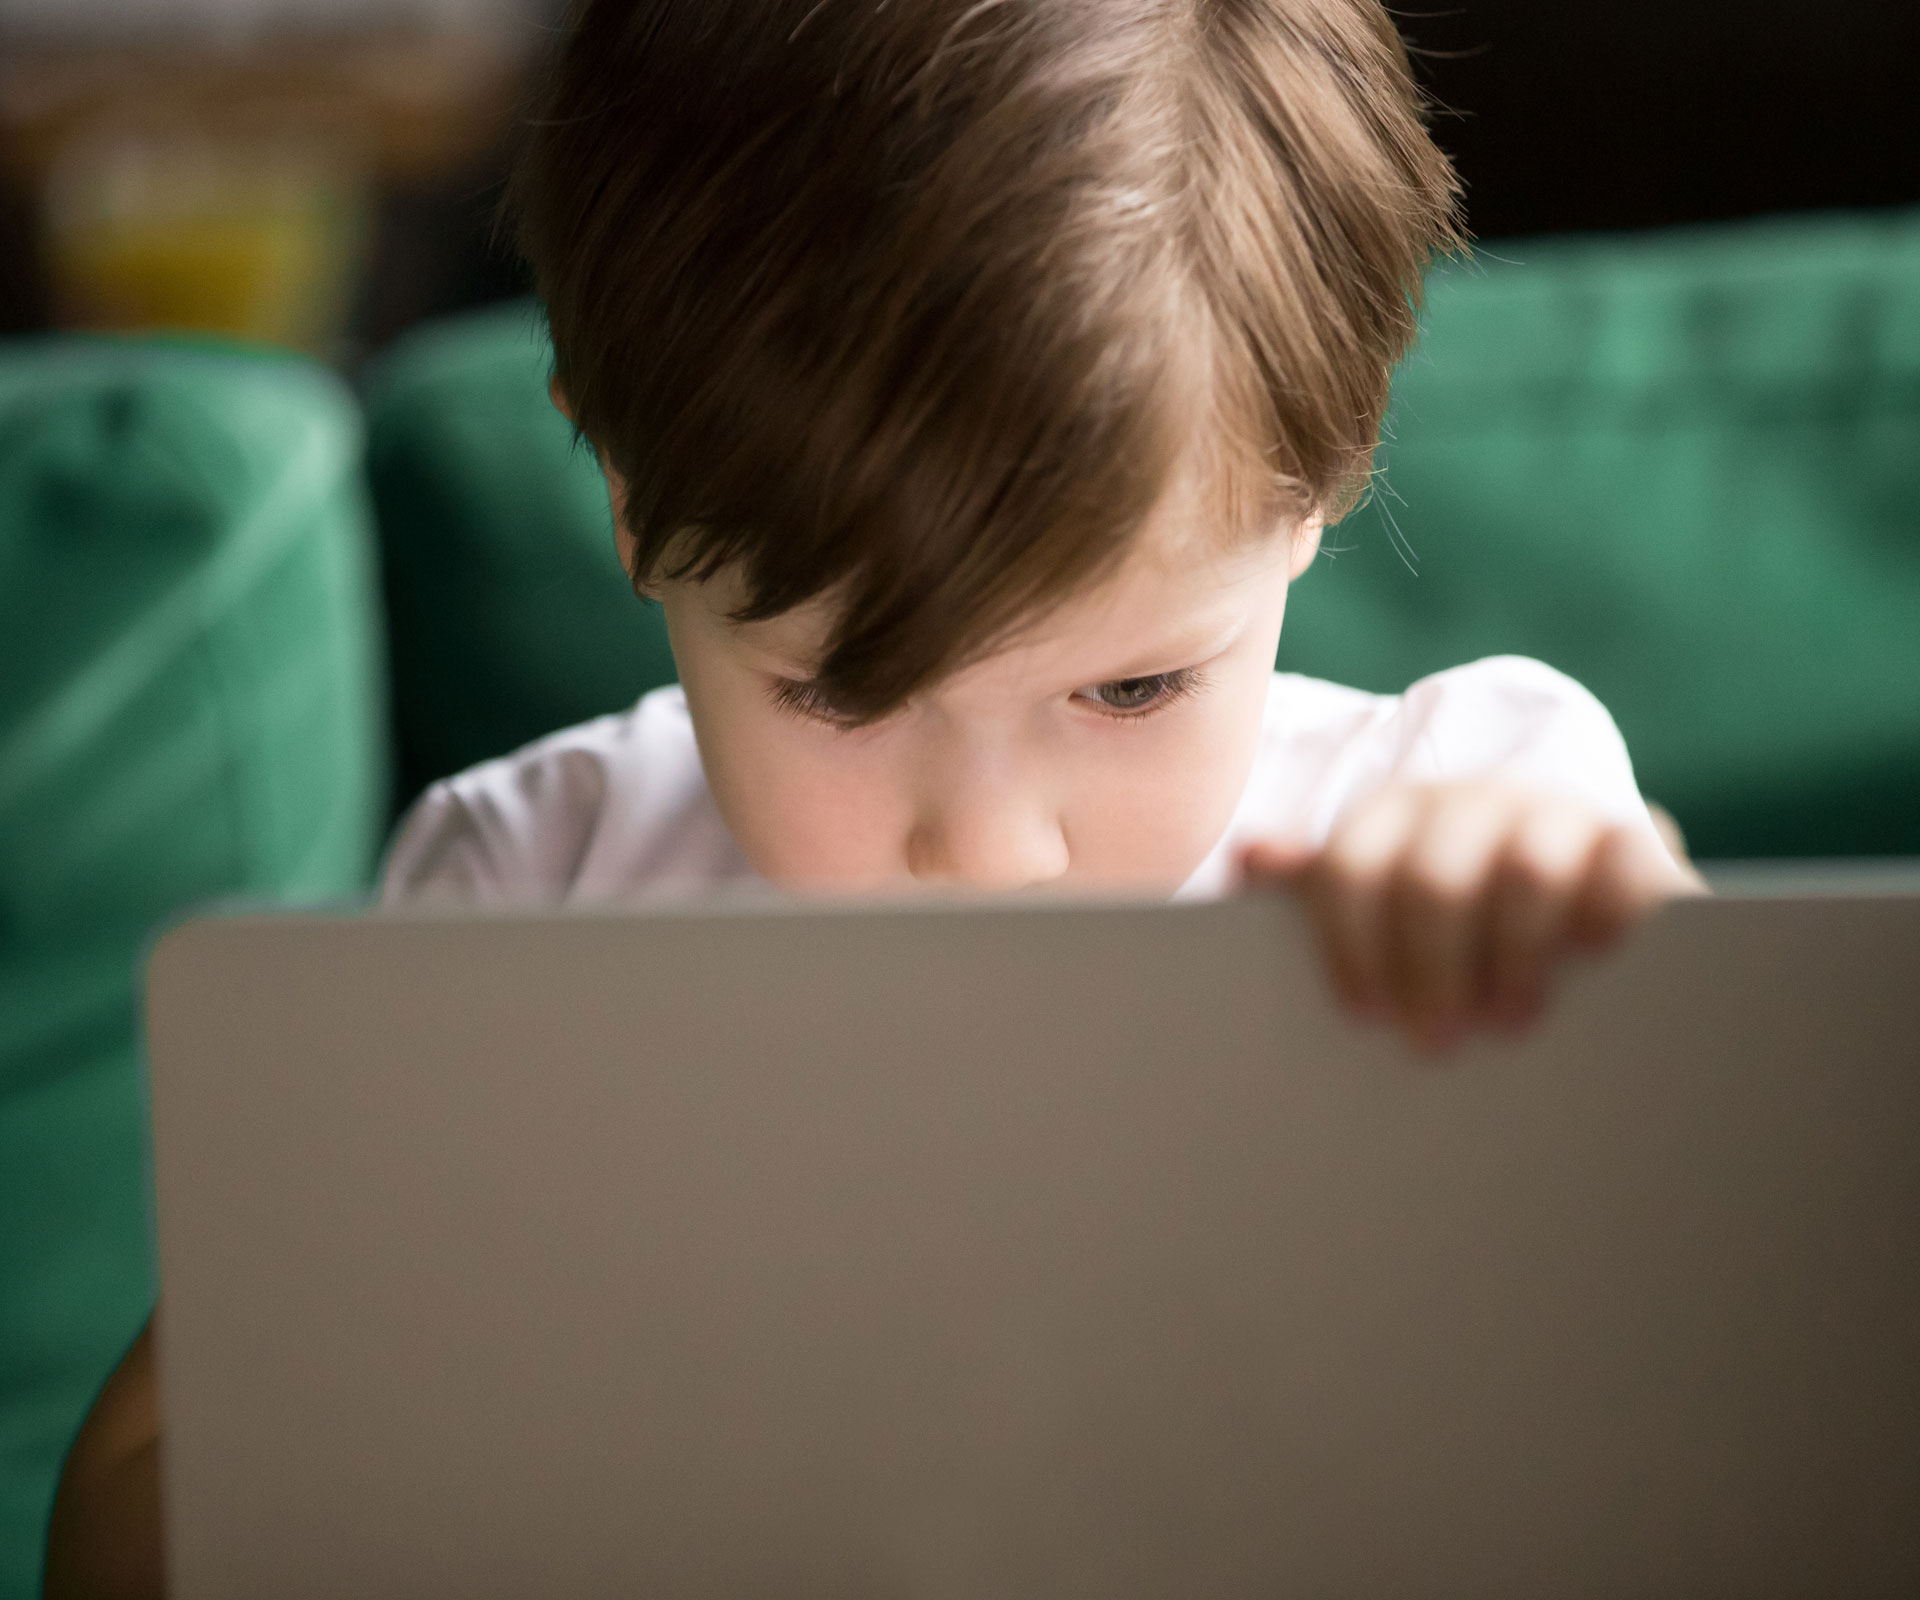 How much time are your kids spending on the Internet?